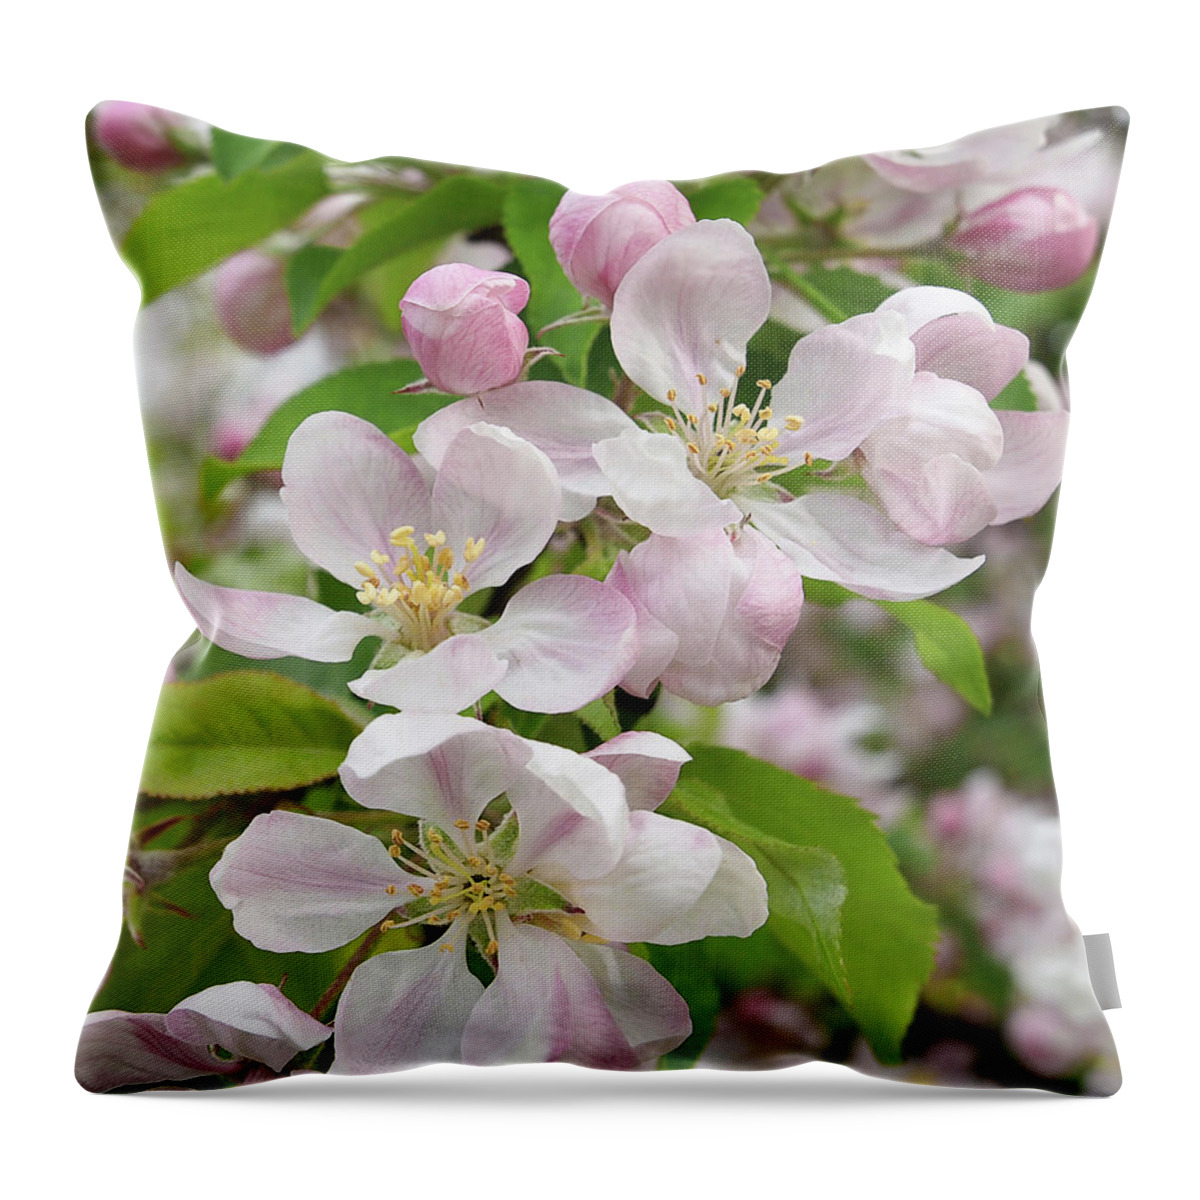 Apple Blossom Throw Pillow featuring the photograph Delicate Soft Pink Apple Blossom by Gill Billington